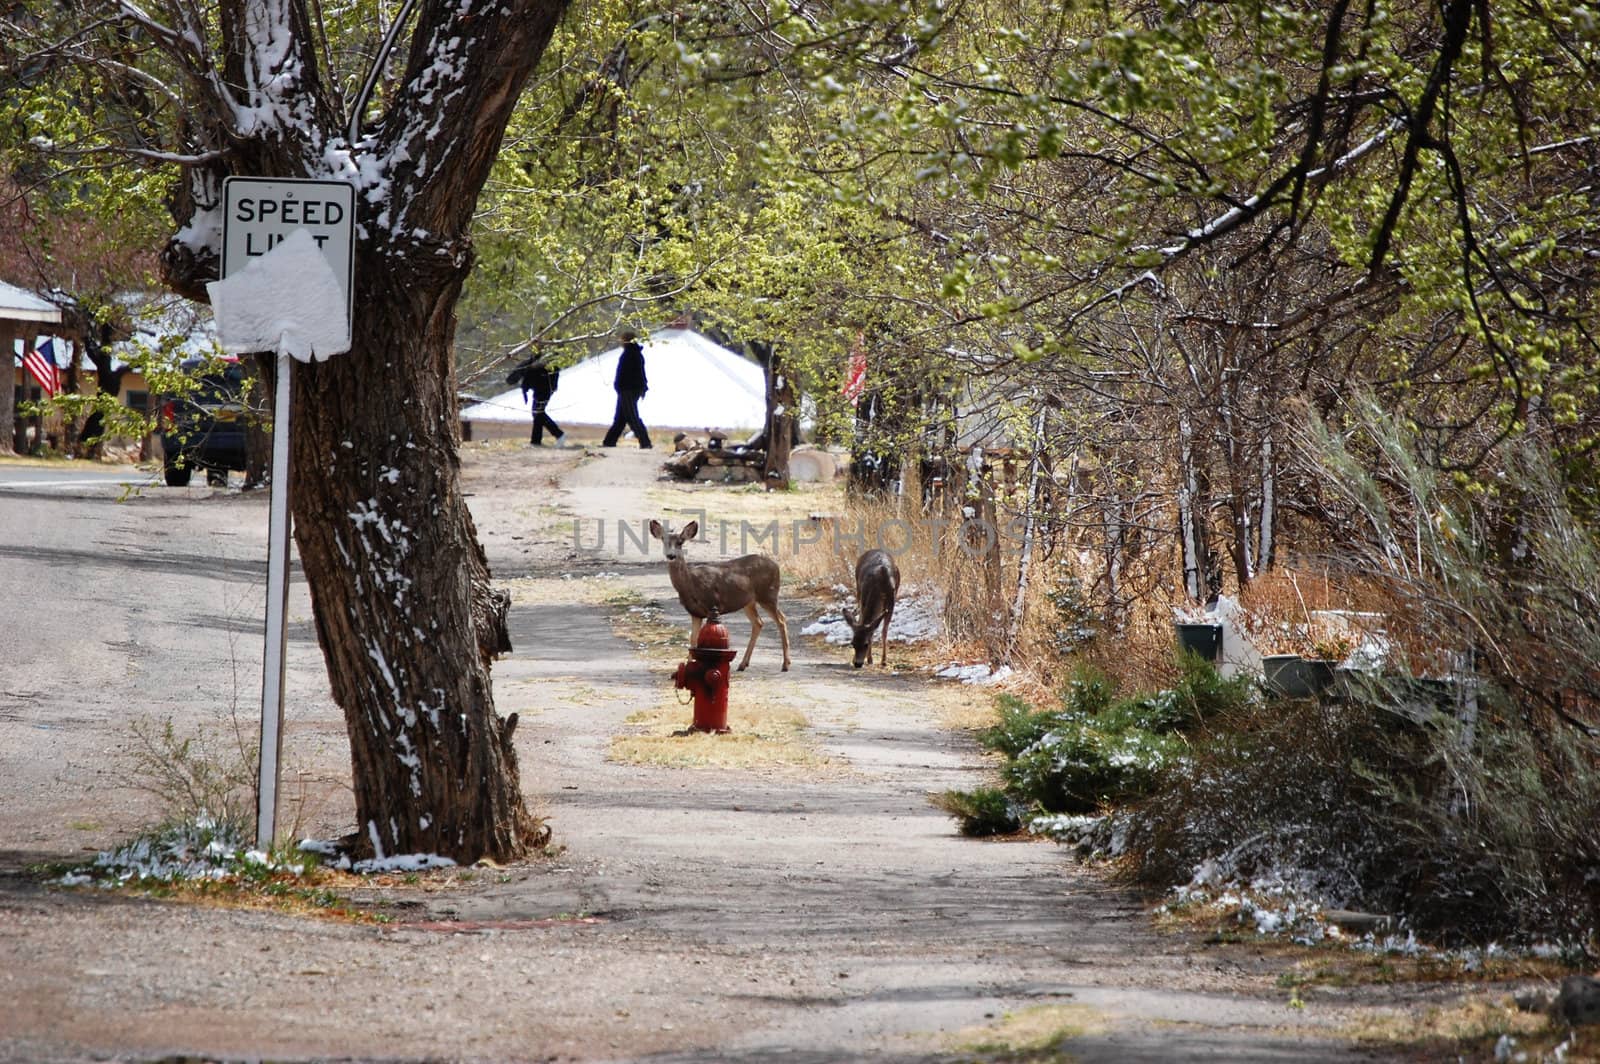 Lincoln New Mexico - Deer in the Street by RefocusPhoto